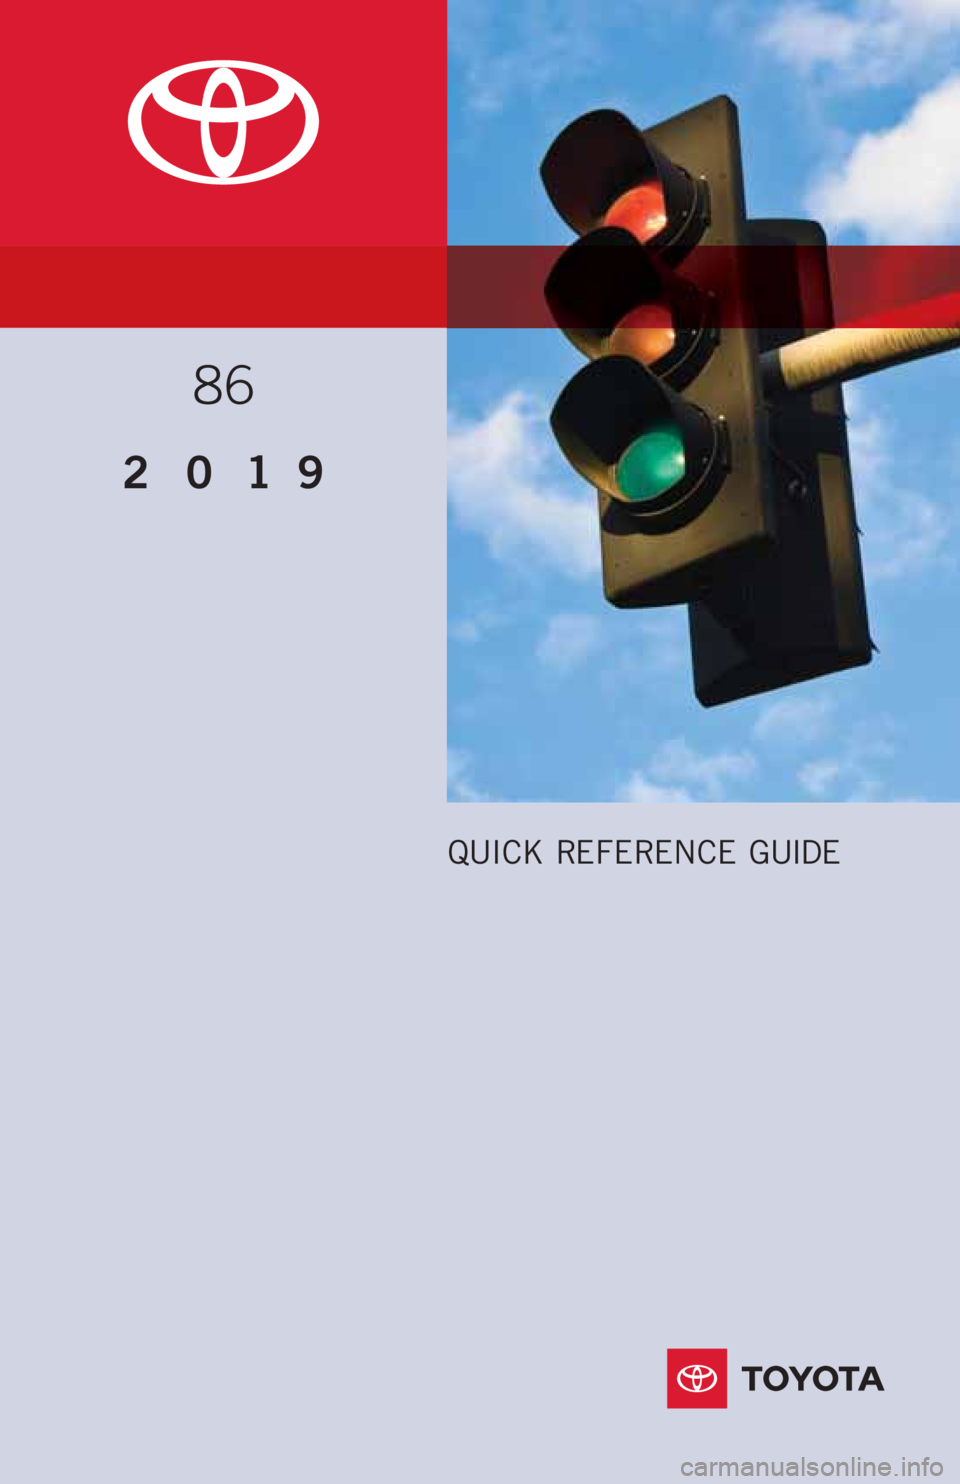 TOYOTA GT86 2019  Owners Manual (in English) 2019 
QUICK REFERENCE GUIDE
86 